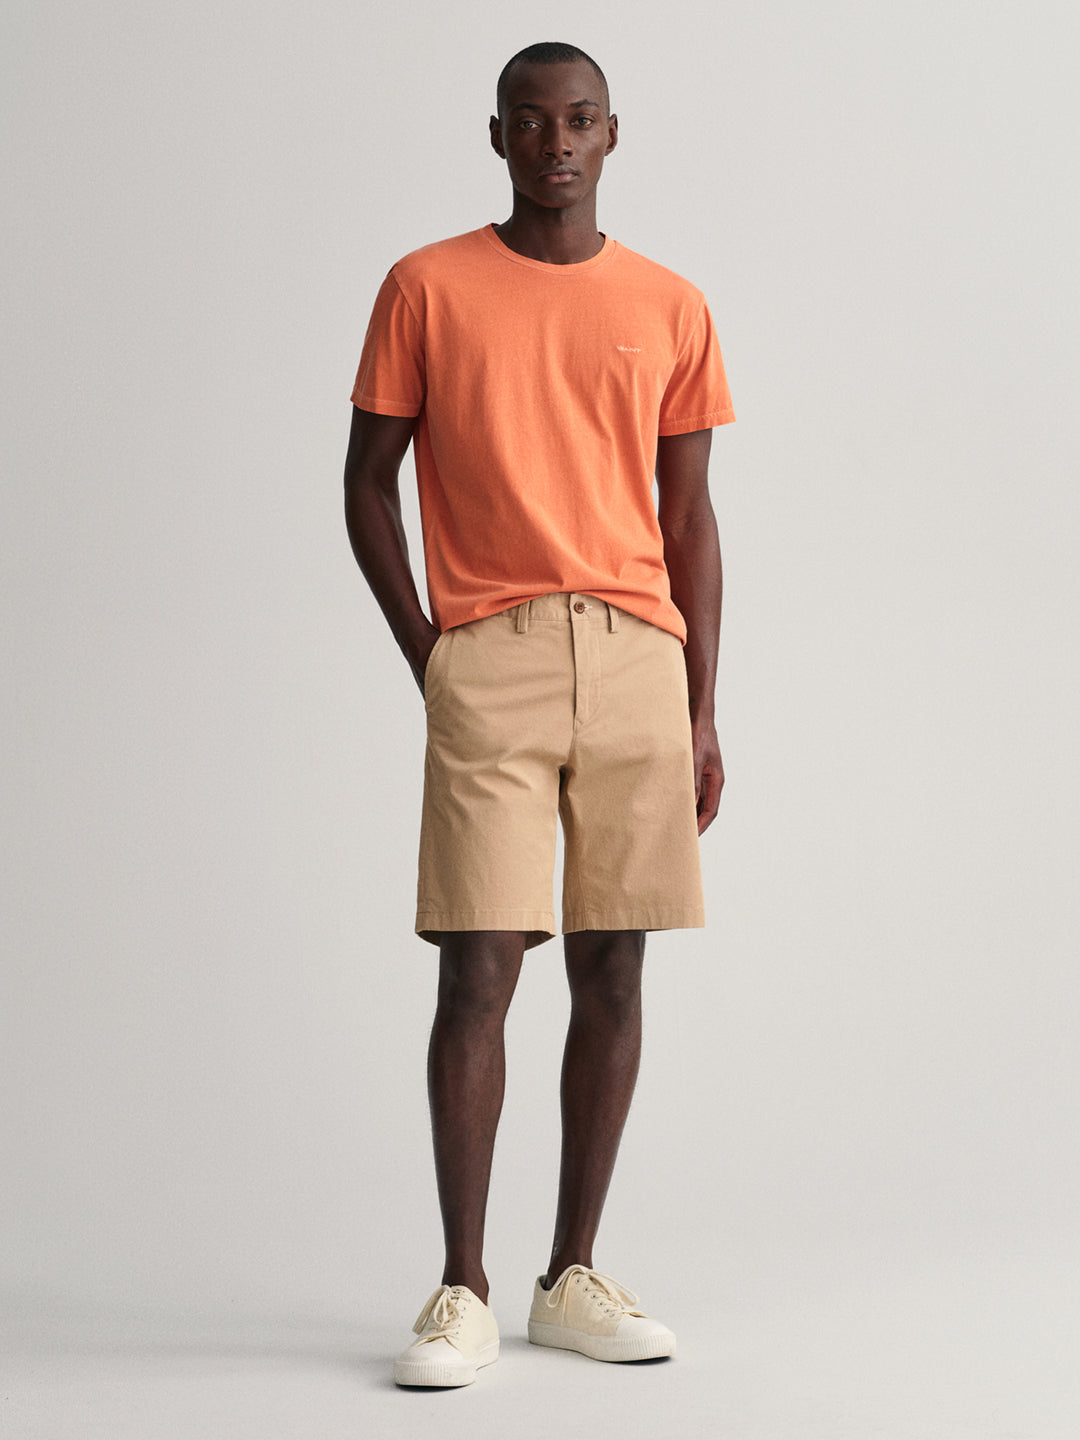 Chinos - Shorts - Shop by Product - Men